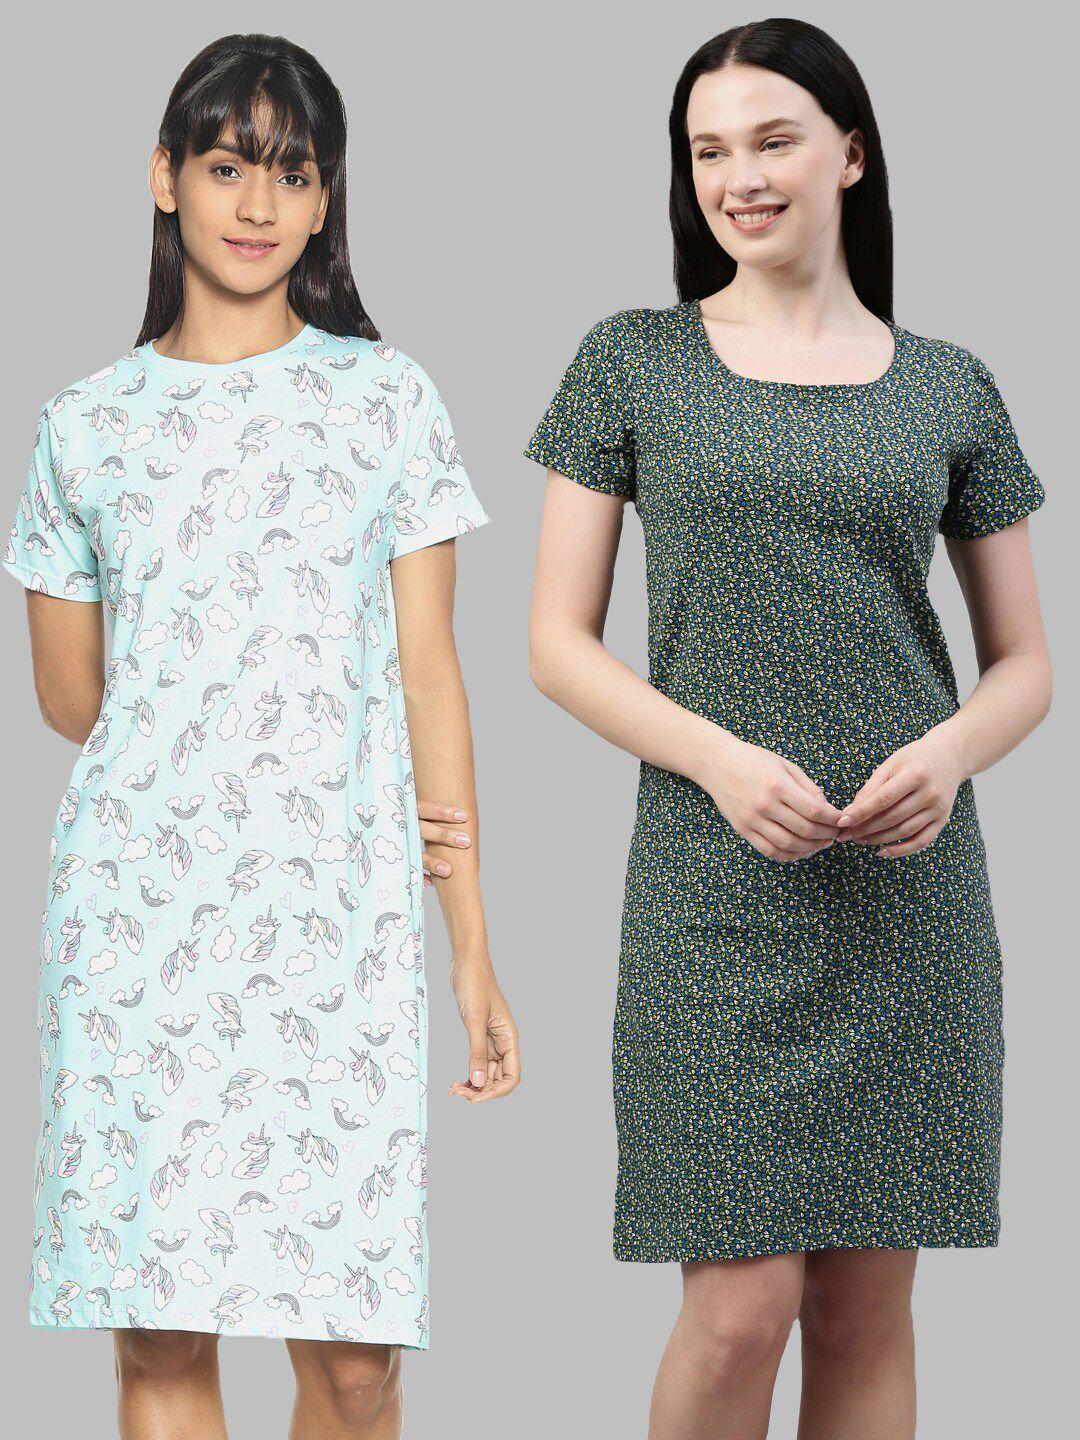 kryptic pack of 2 turquoise blue & green printed pure cotton t-shirt nightdress